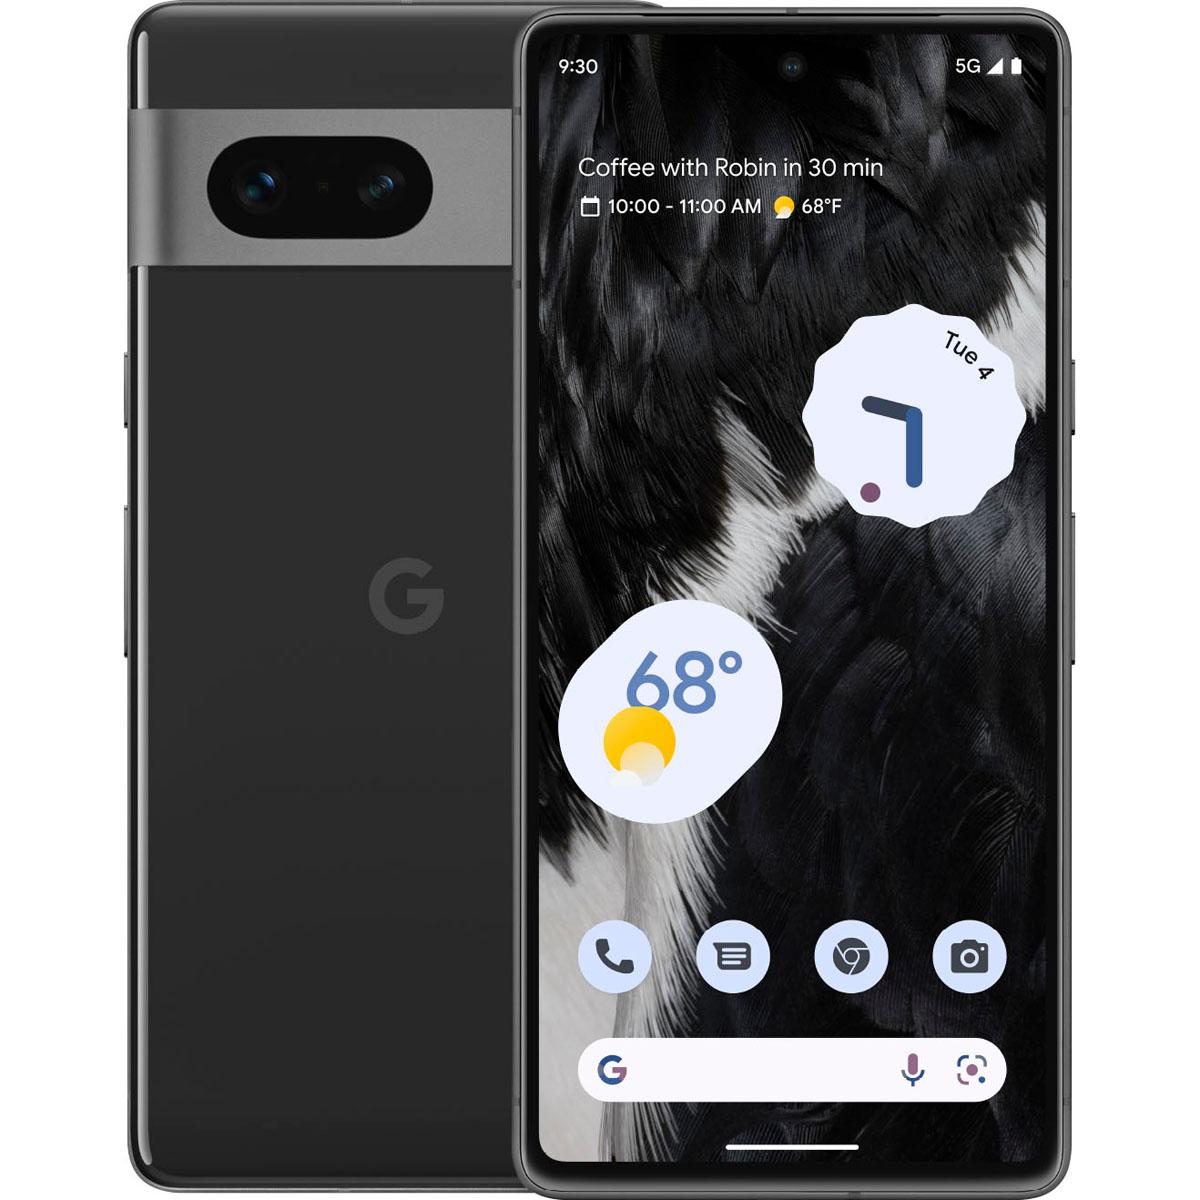 Google Pixel 7 5G Smartphone for Free If You Use It With Xfinity for 24 Months